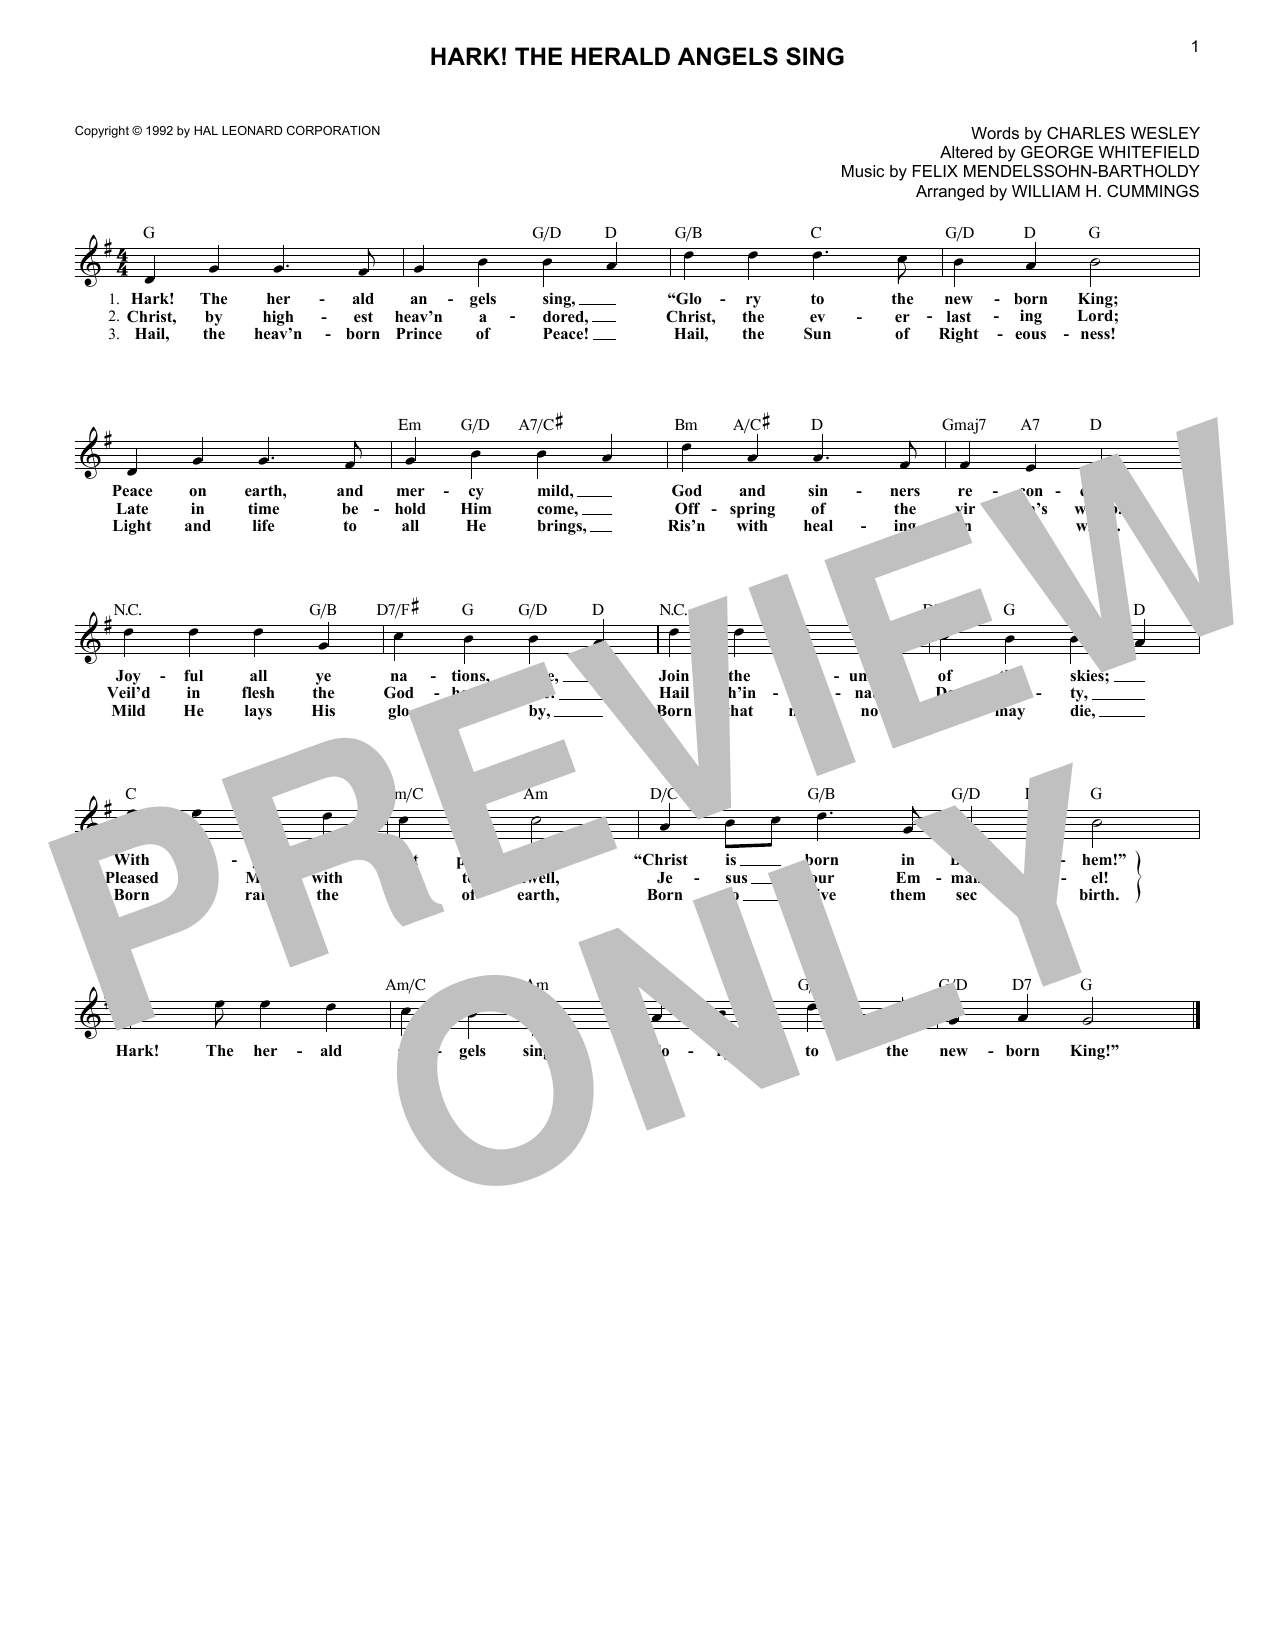 Christmas Carol Hark! The Herald Angels Sing sheet music notes and chords. Download Printable PDF.